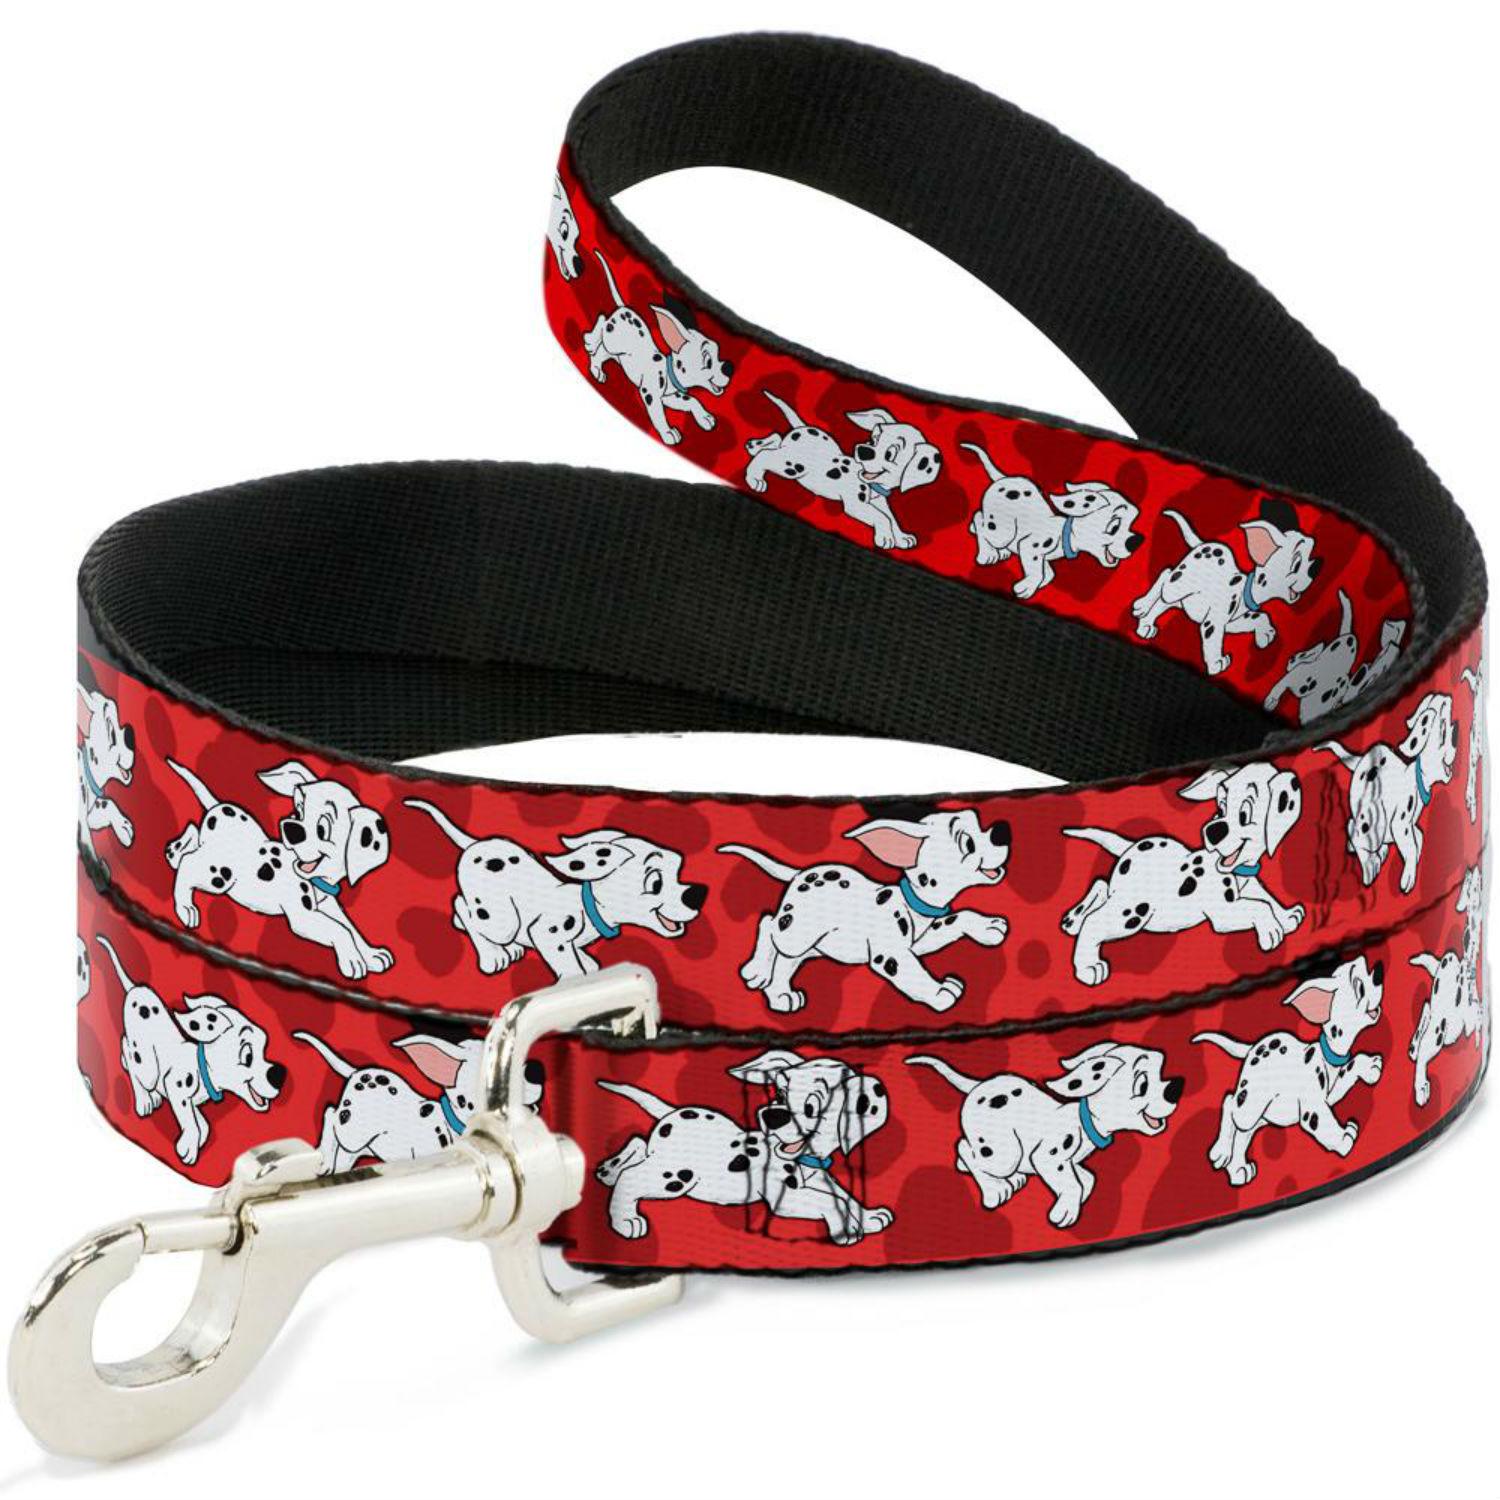 Dalmatians Dog Leash by Buckle-Down - Red